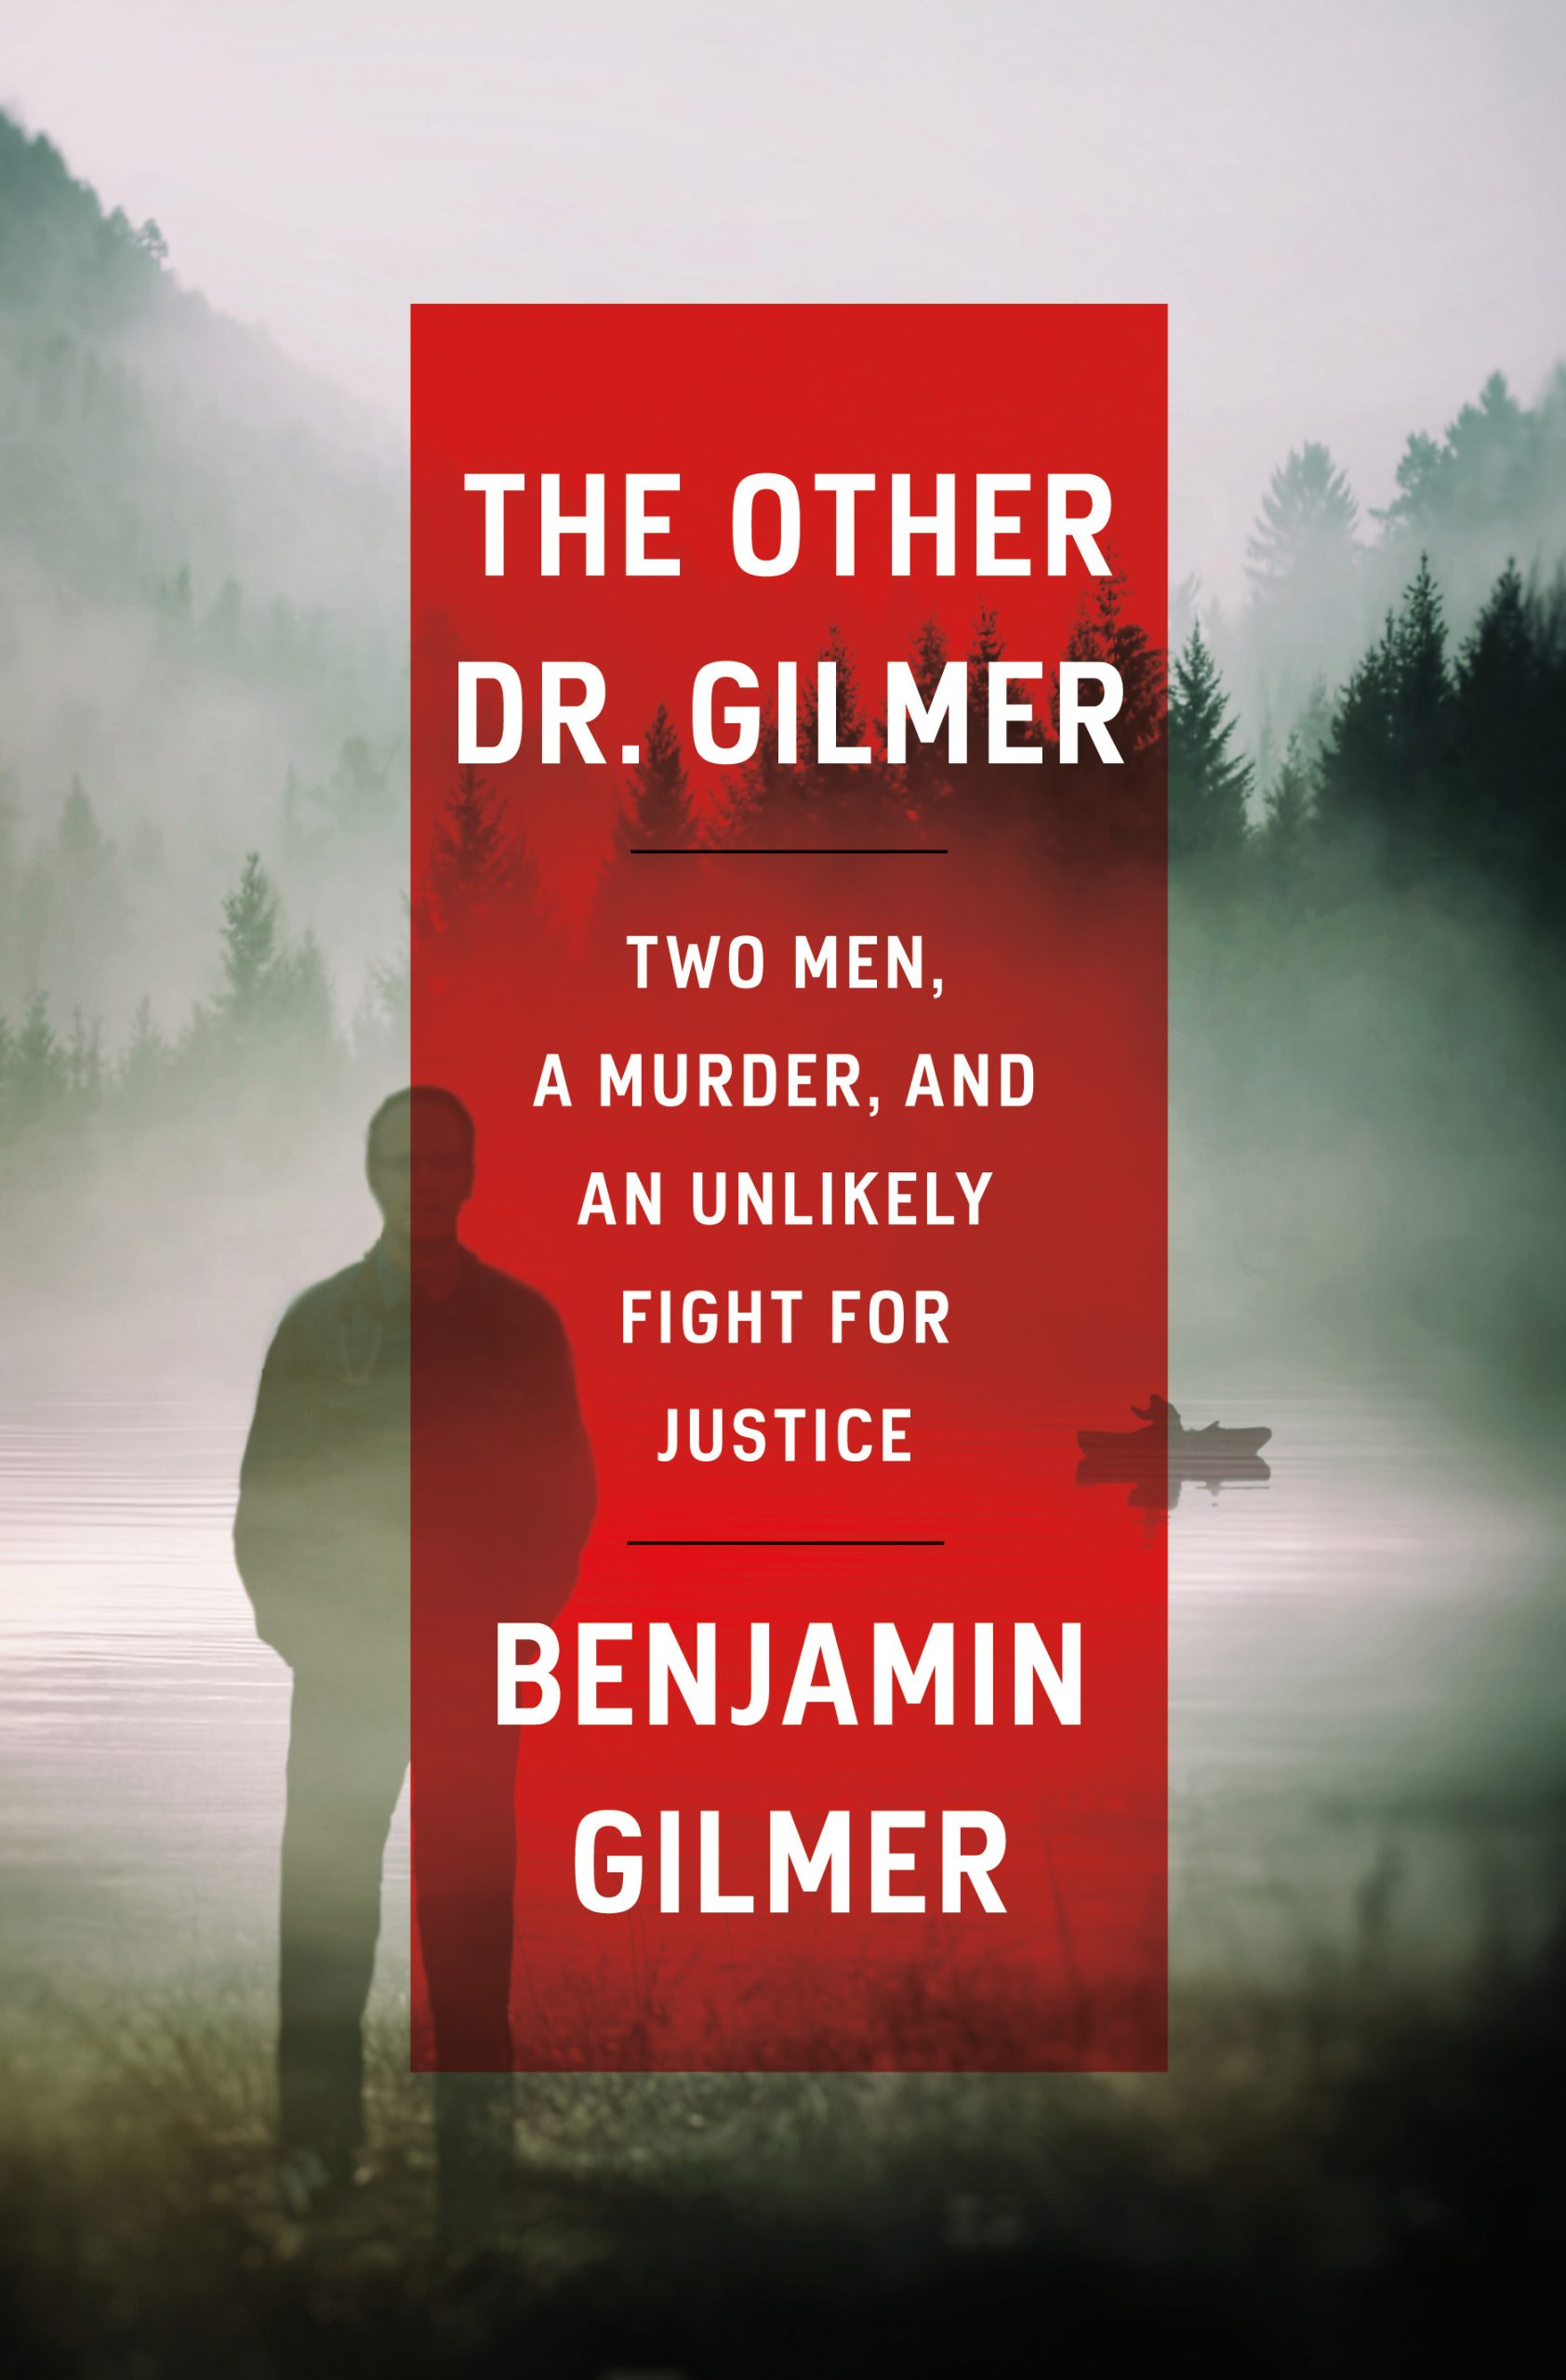 The Other Dr. Gilmer: Two Men, A Murder, and an Unlikely Fight for Justice